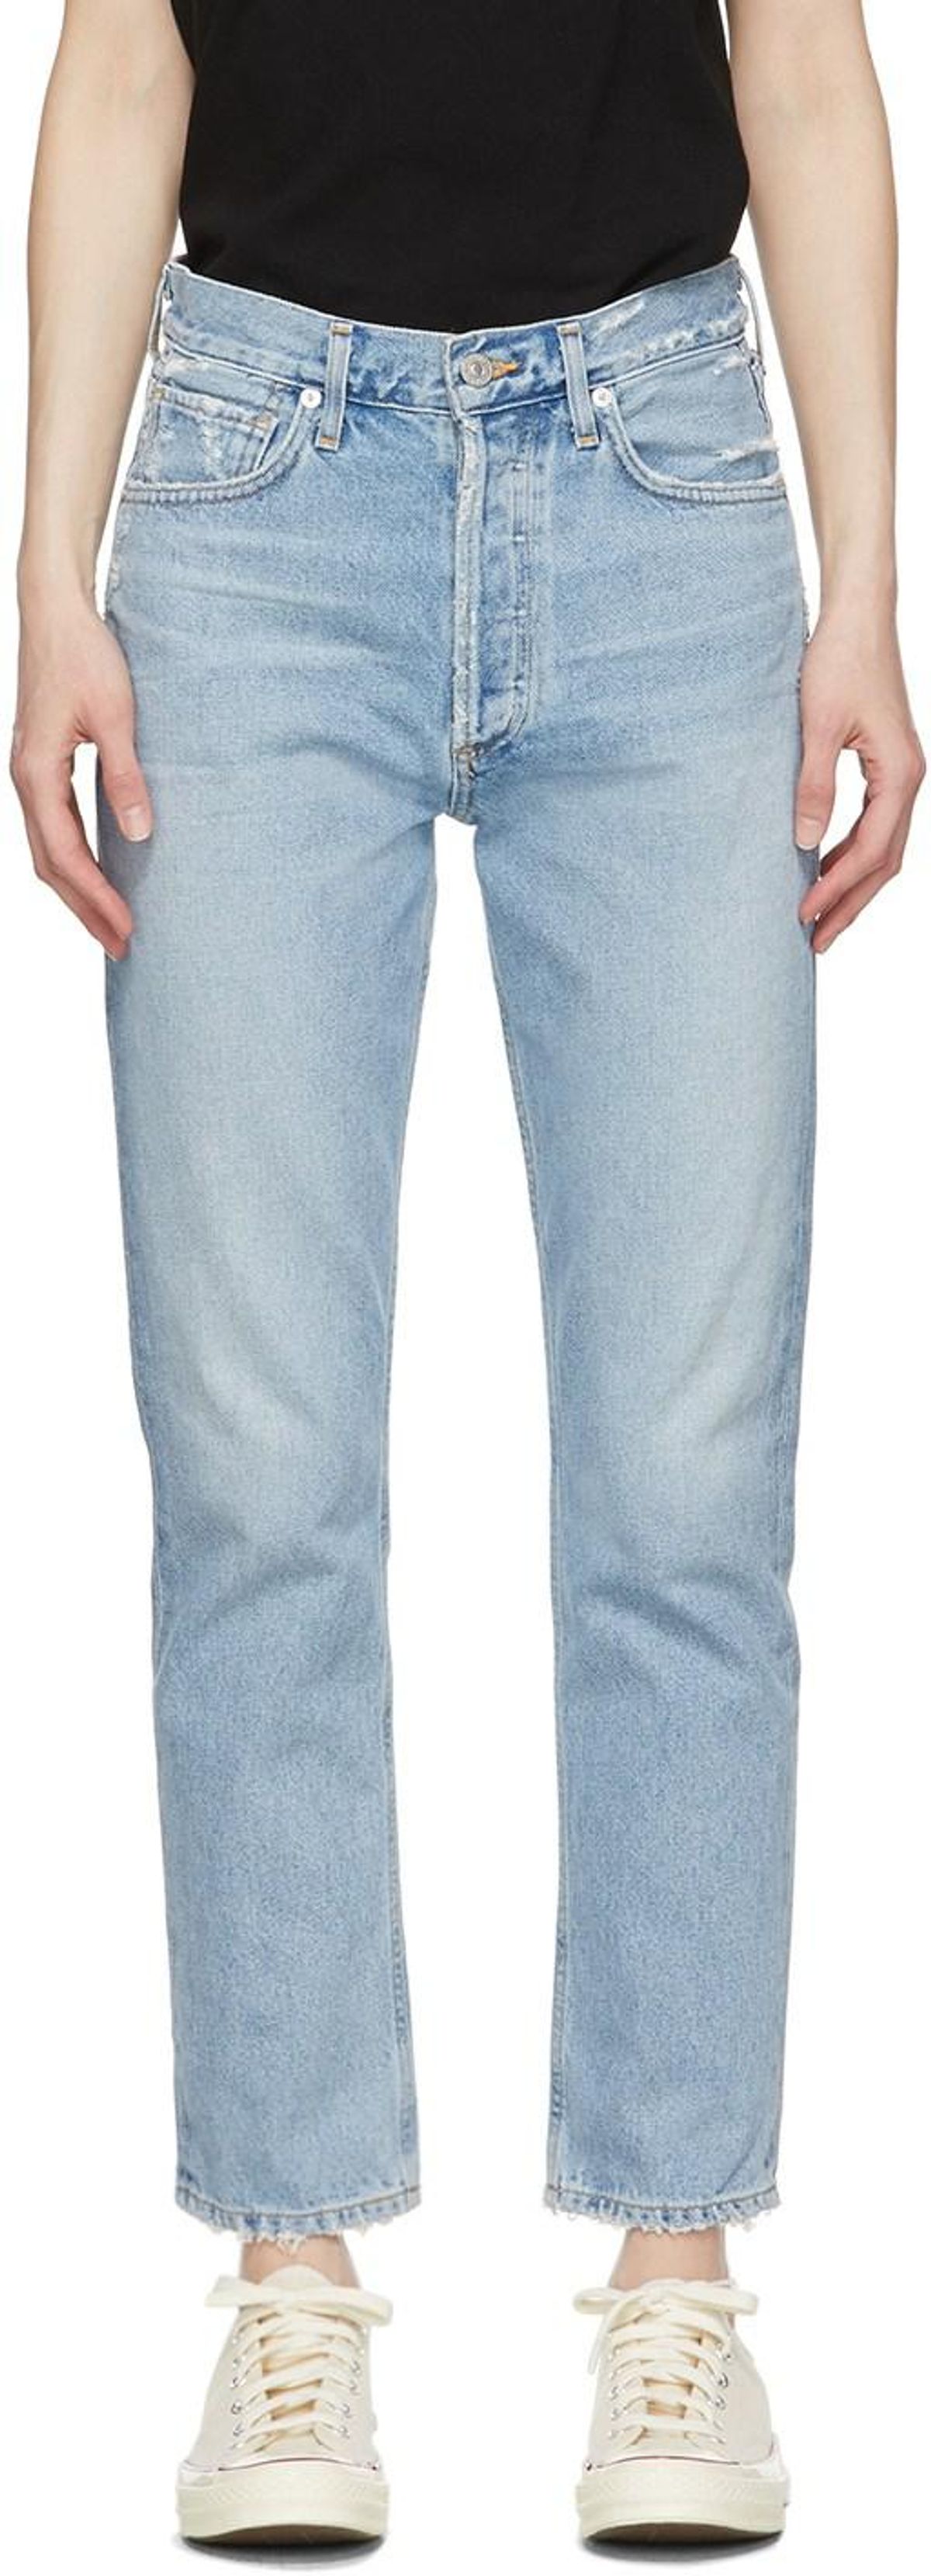 citizens of humanity high rise charlotte jeans